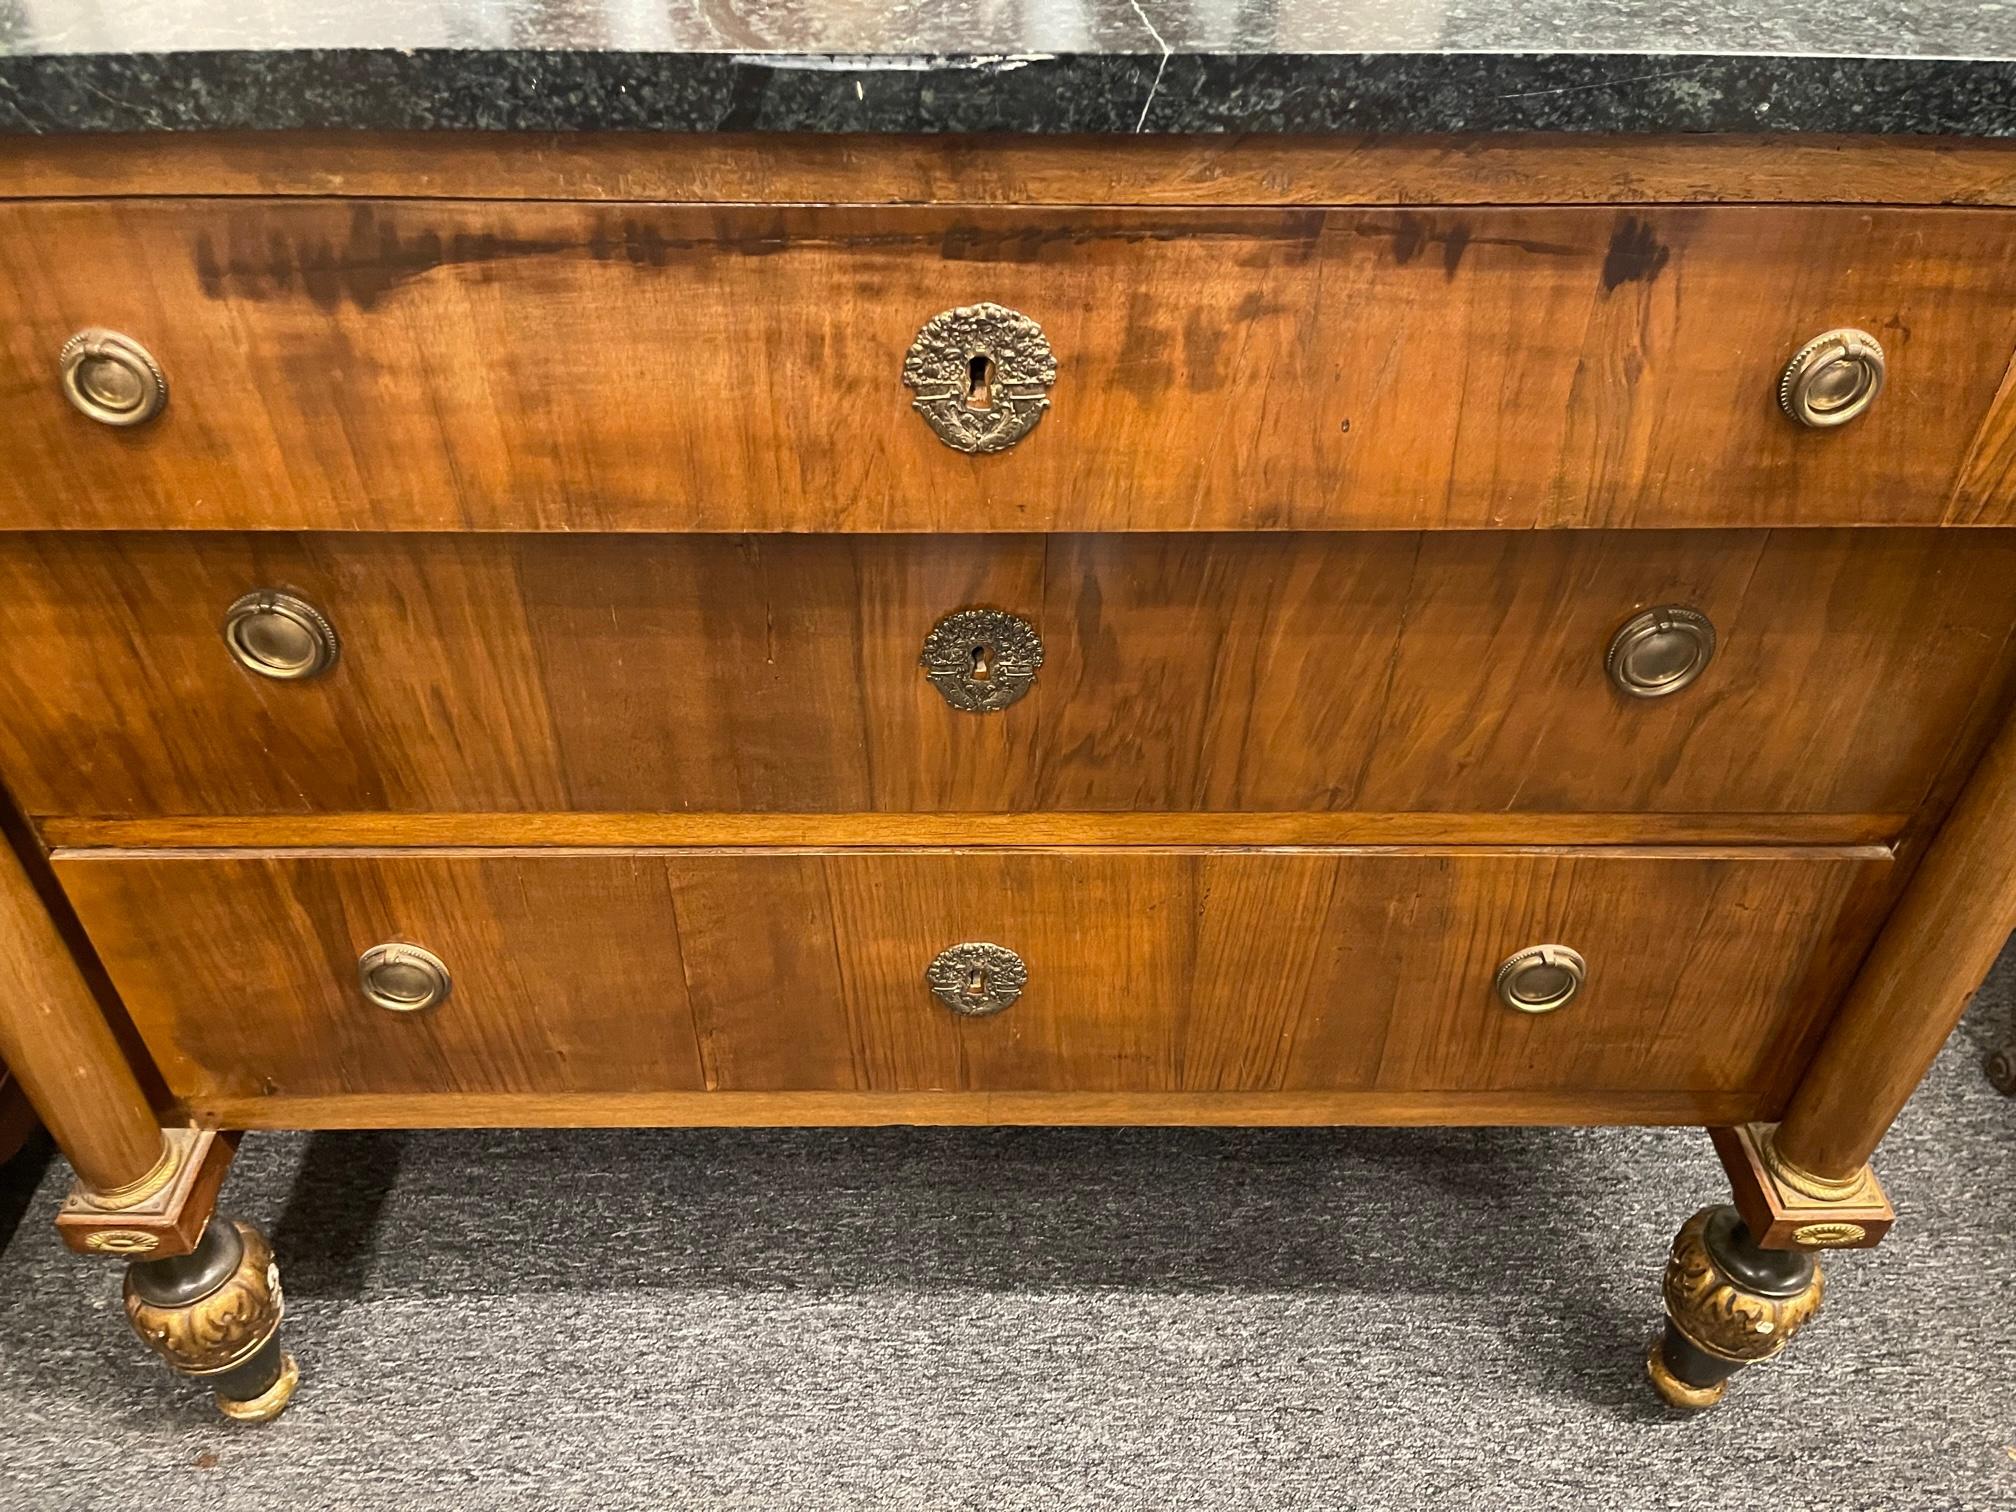 Northern European Mahogany Marble Top Commode with Painted Feet, 19th Century For Sale 6